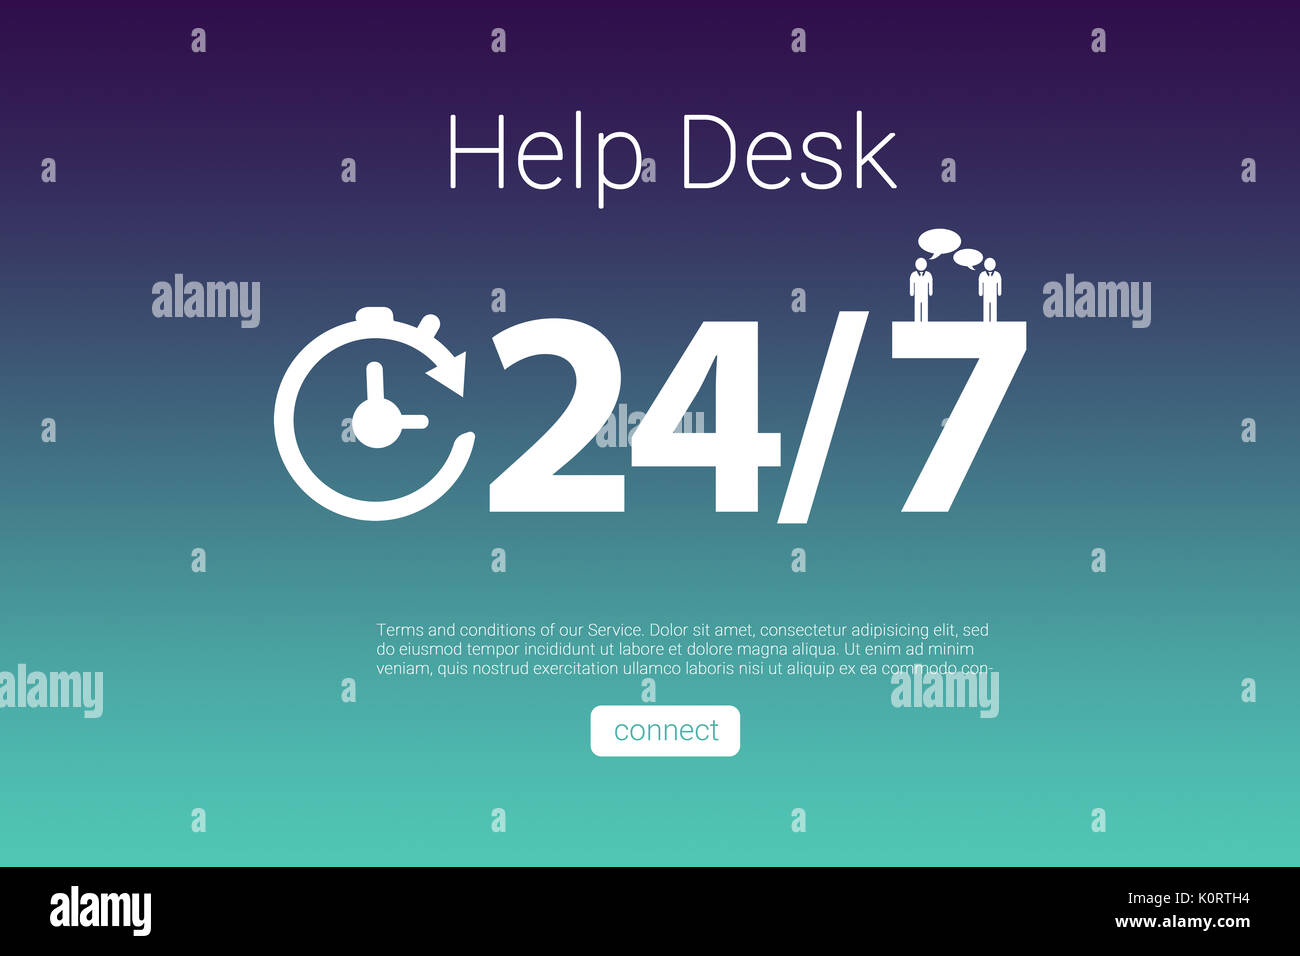 Help desk text with icons and numbers against turquoise and purple background Stock Photo